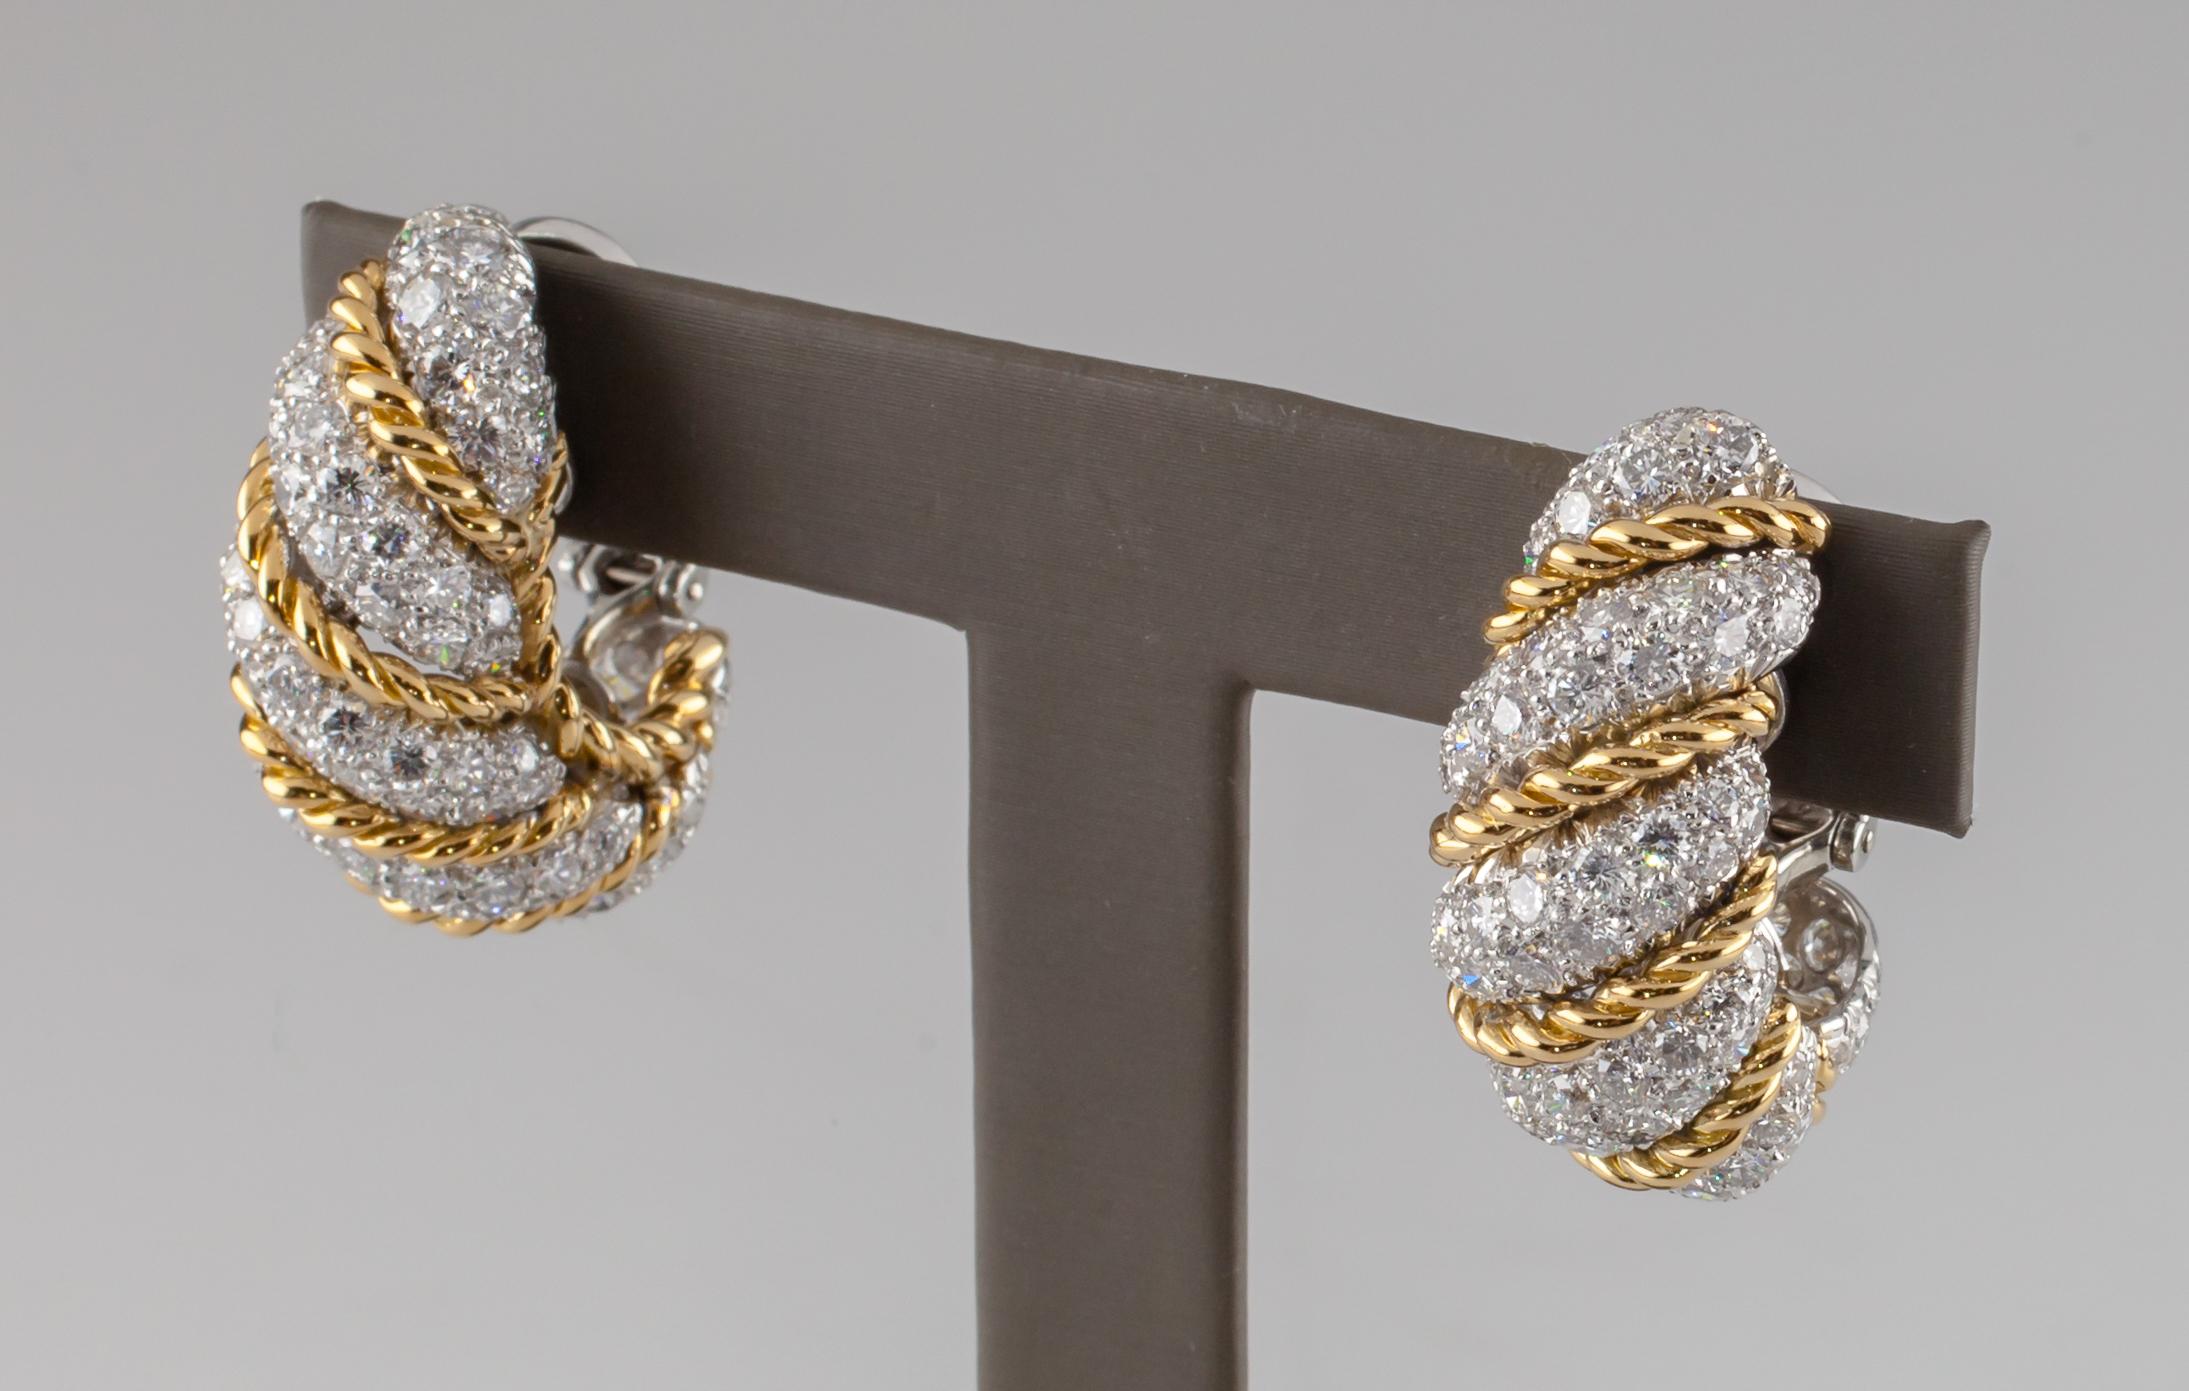 Gorgeous Vintage Earrings by Van Cleef & Arpels
Feature 18k Yellow Gold Twist Rope Accents Separating Pave-Set Round Diamond Segments in a Twist Pattern
Shrimp Huggie Earrings with Post and Omega Back
Hallmarked 